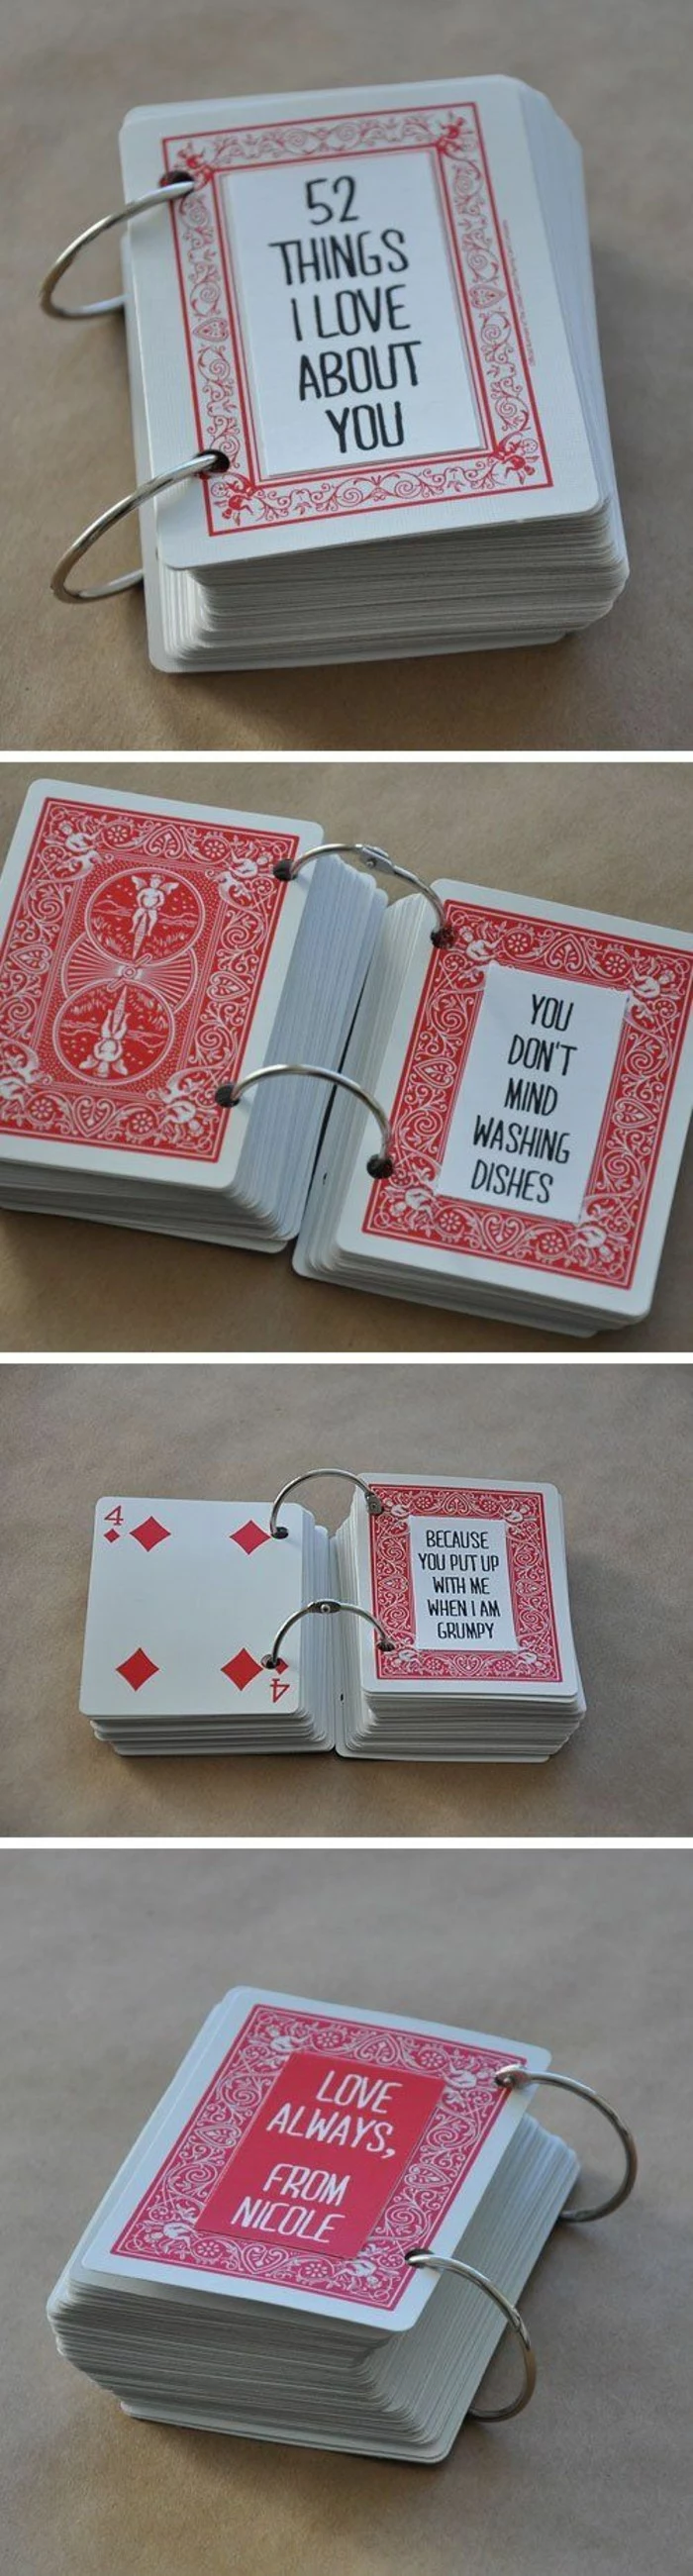 things i love about you, deck of cards, crafty christmas gifts, diy tutorial, side by side pictures